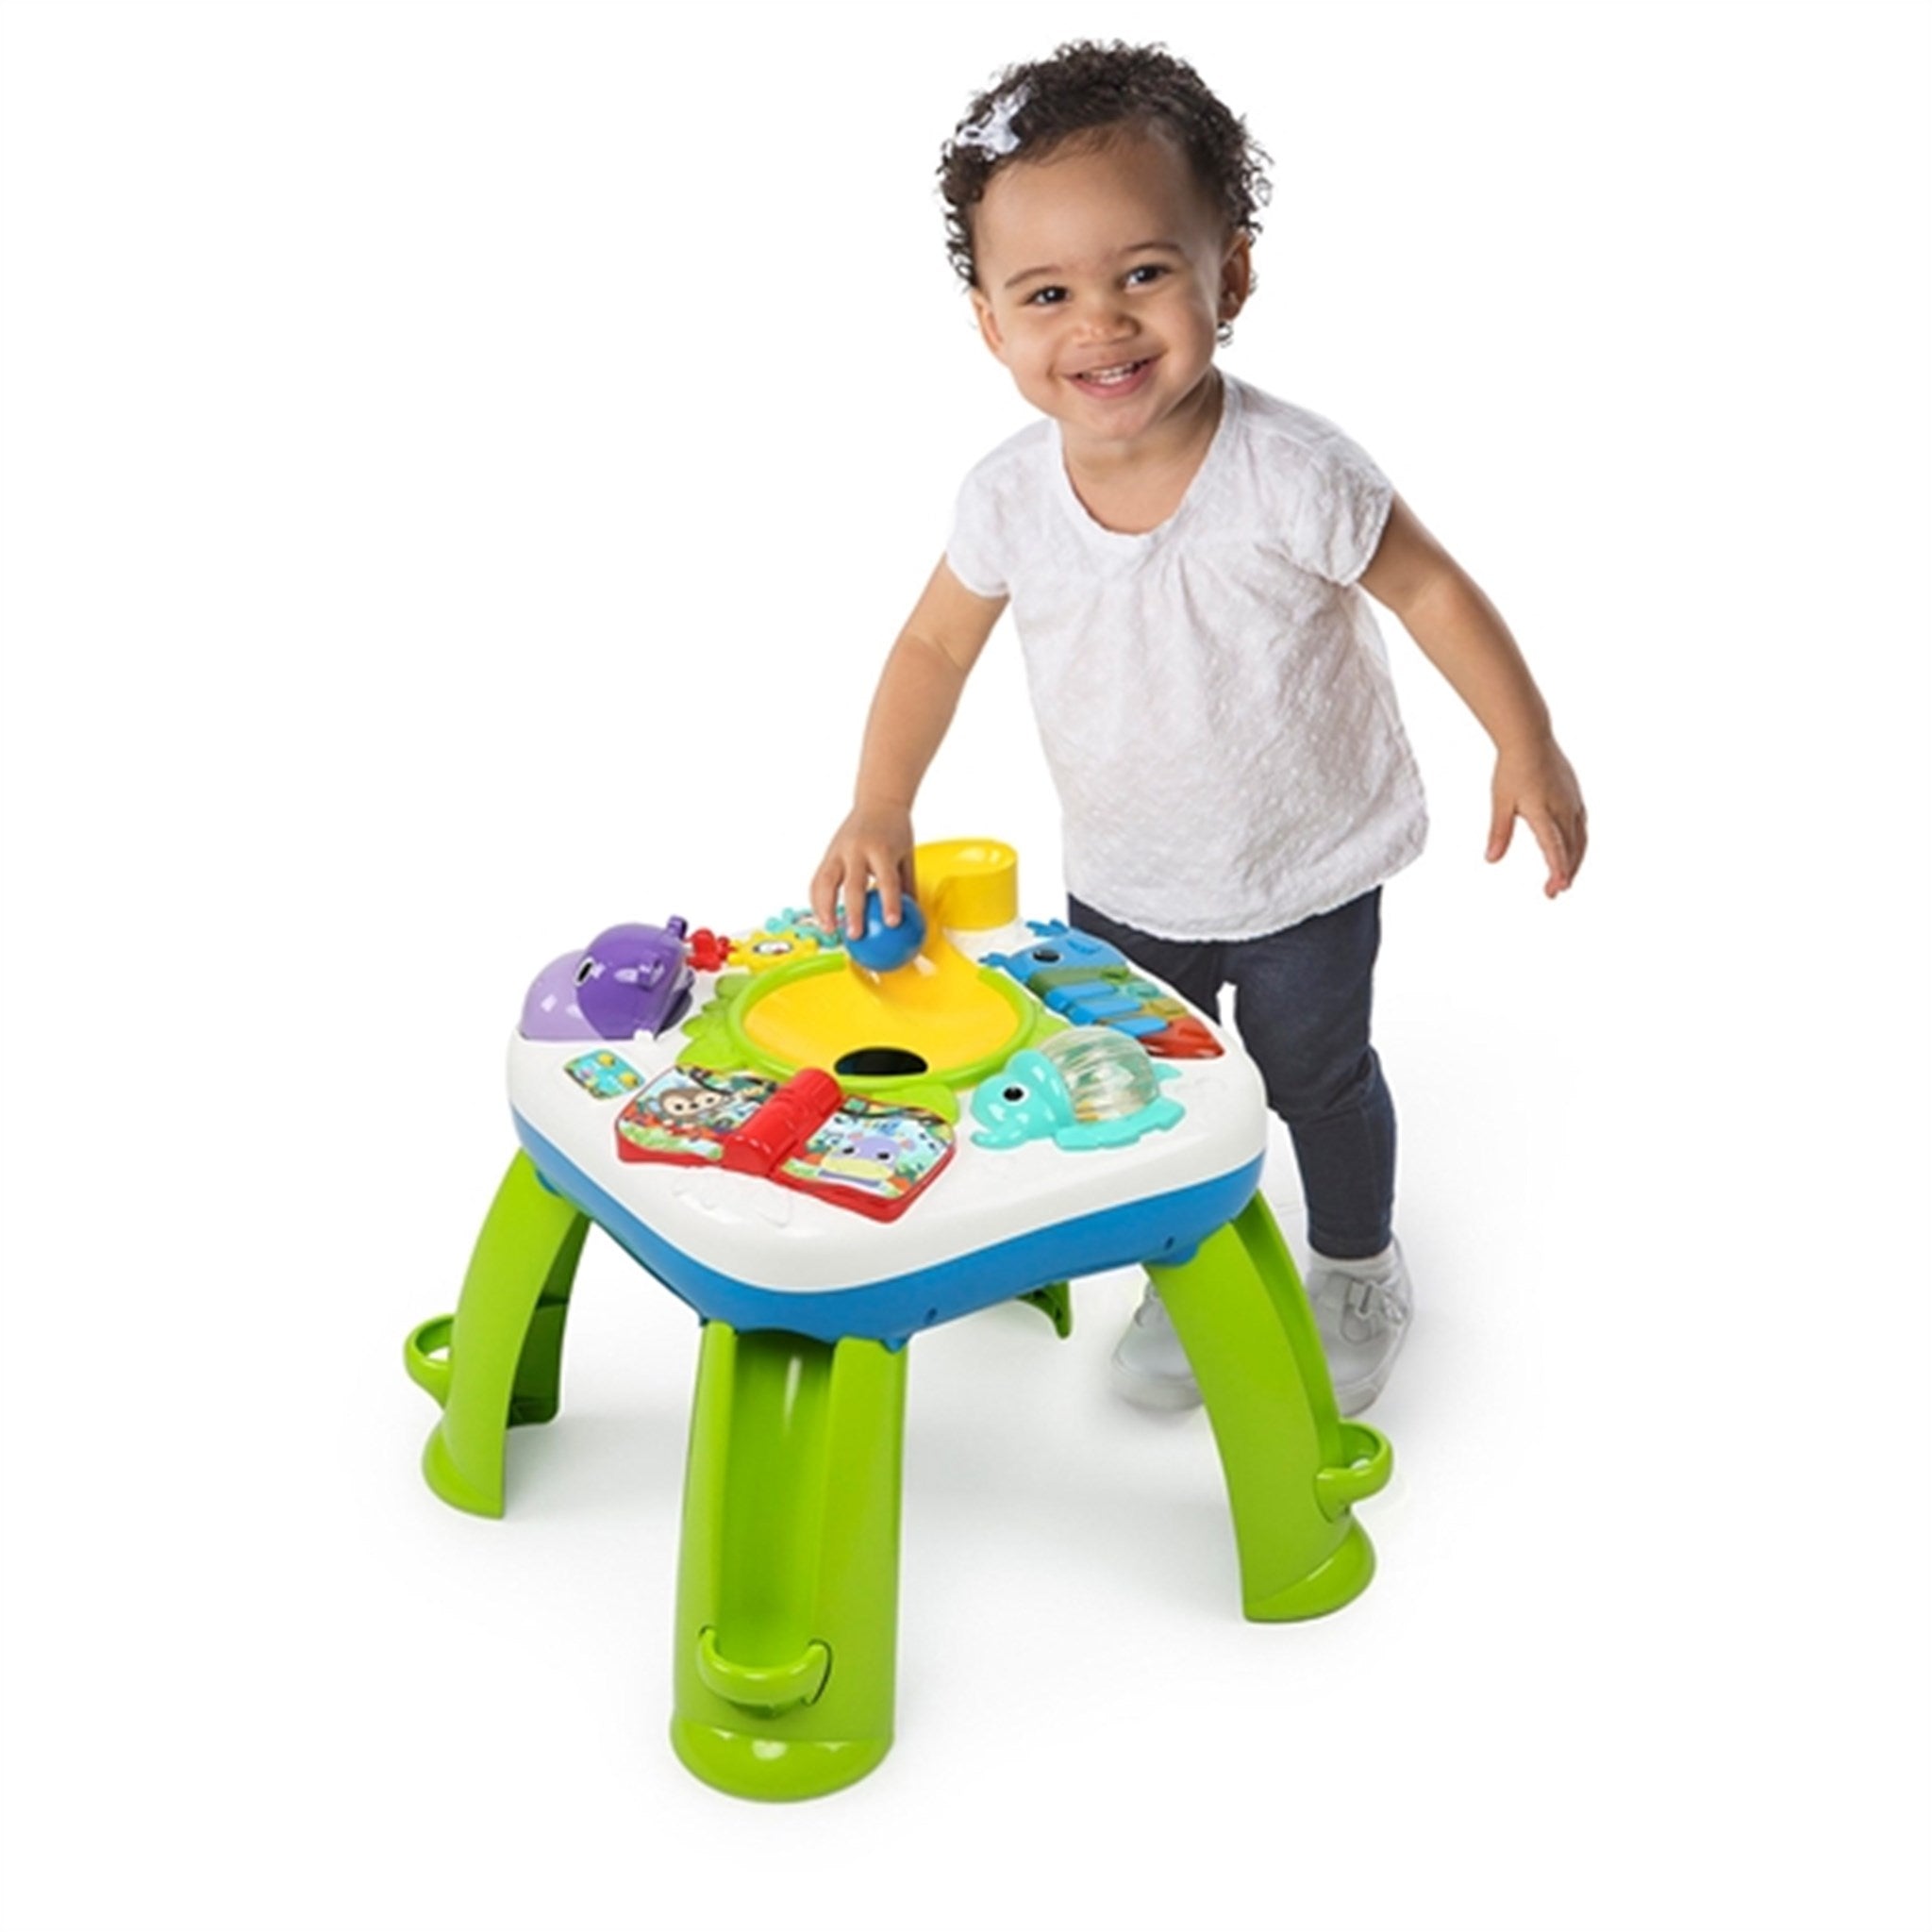 Bright Starts Having a Ball Get Rollin' Activity Table 4